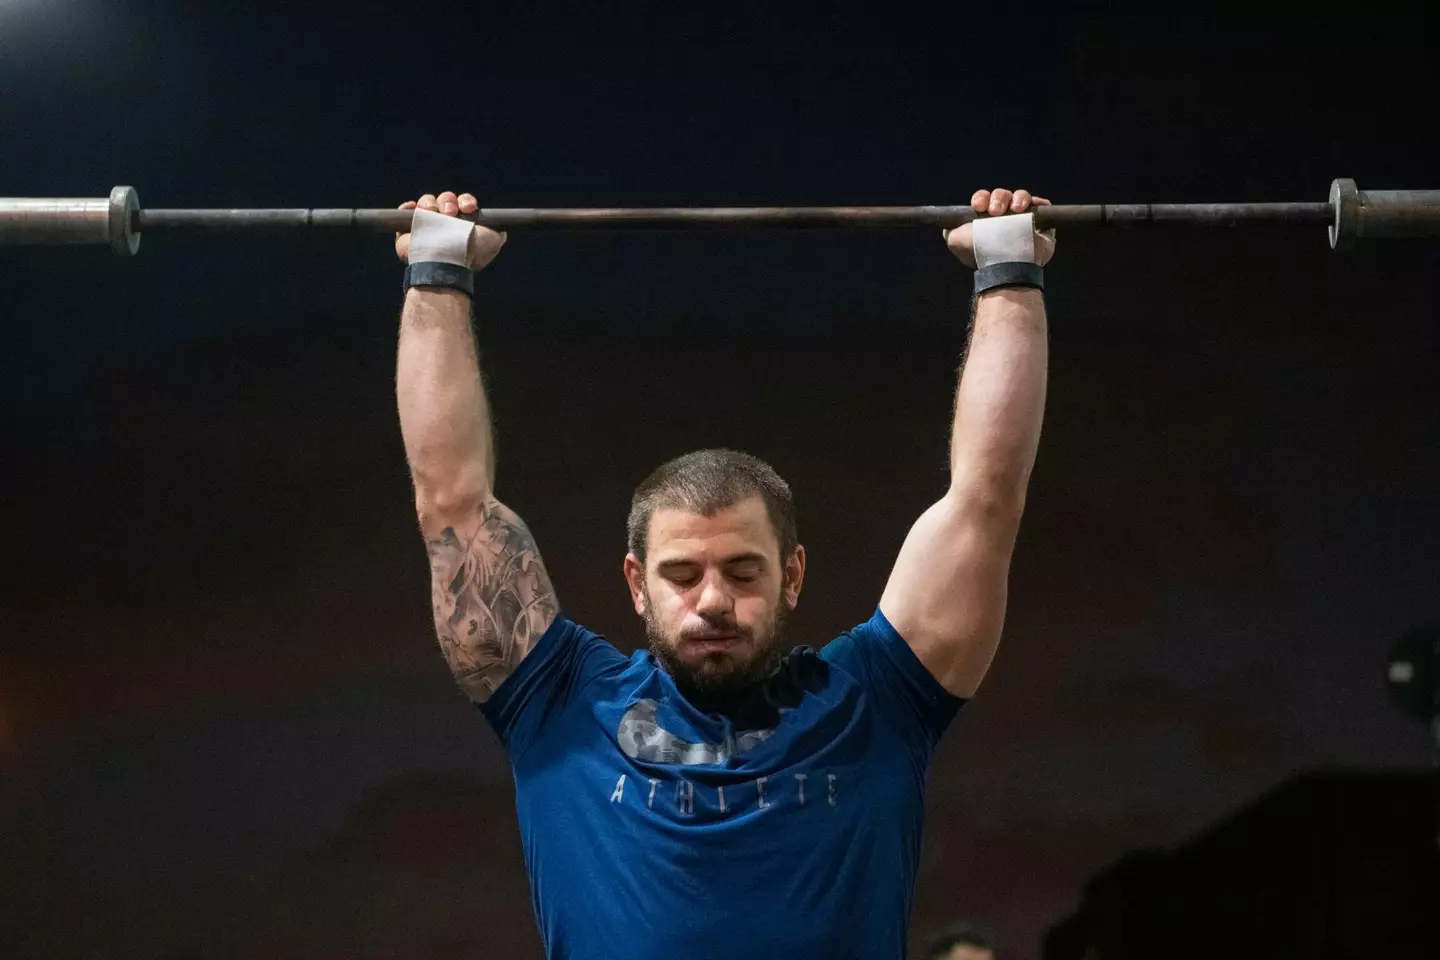 Mat Fraser could well be the fittest man ever.